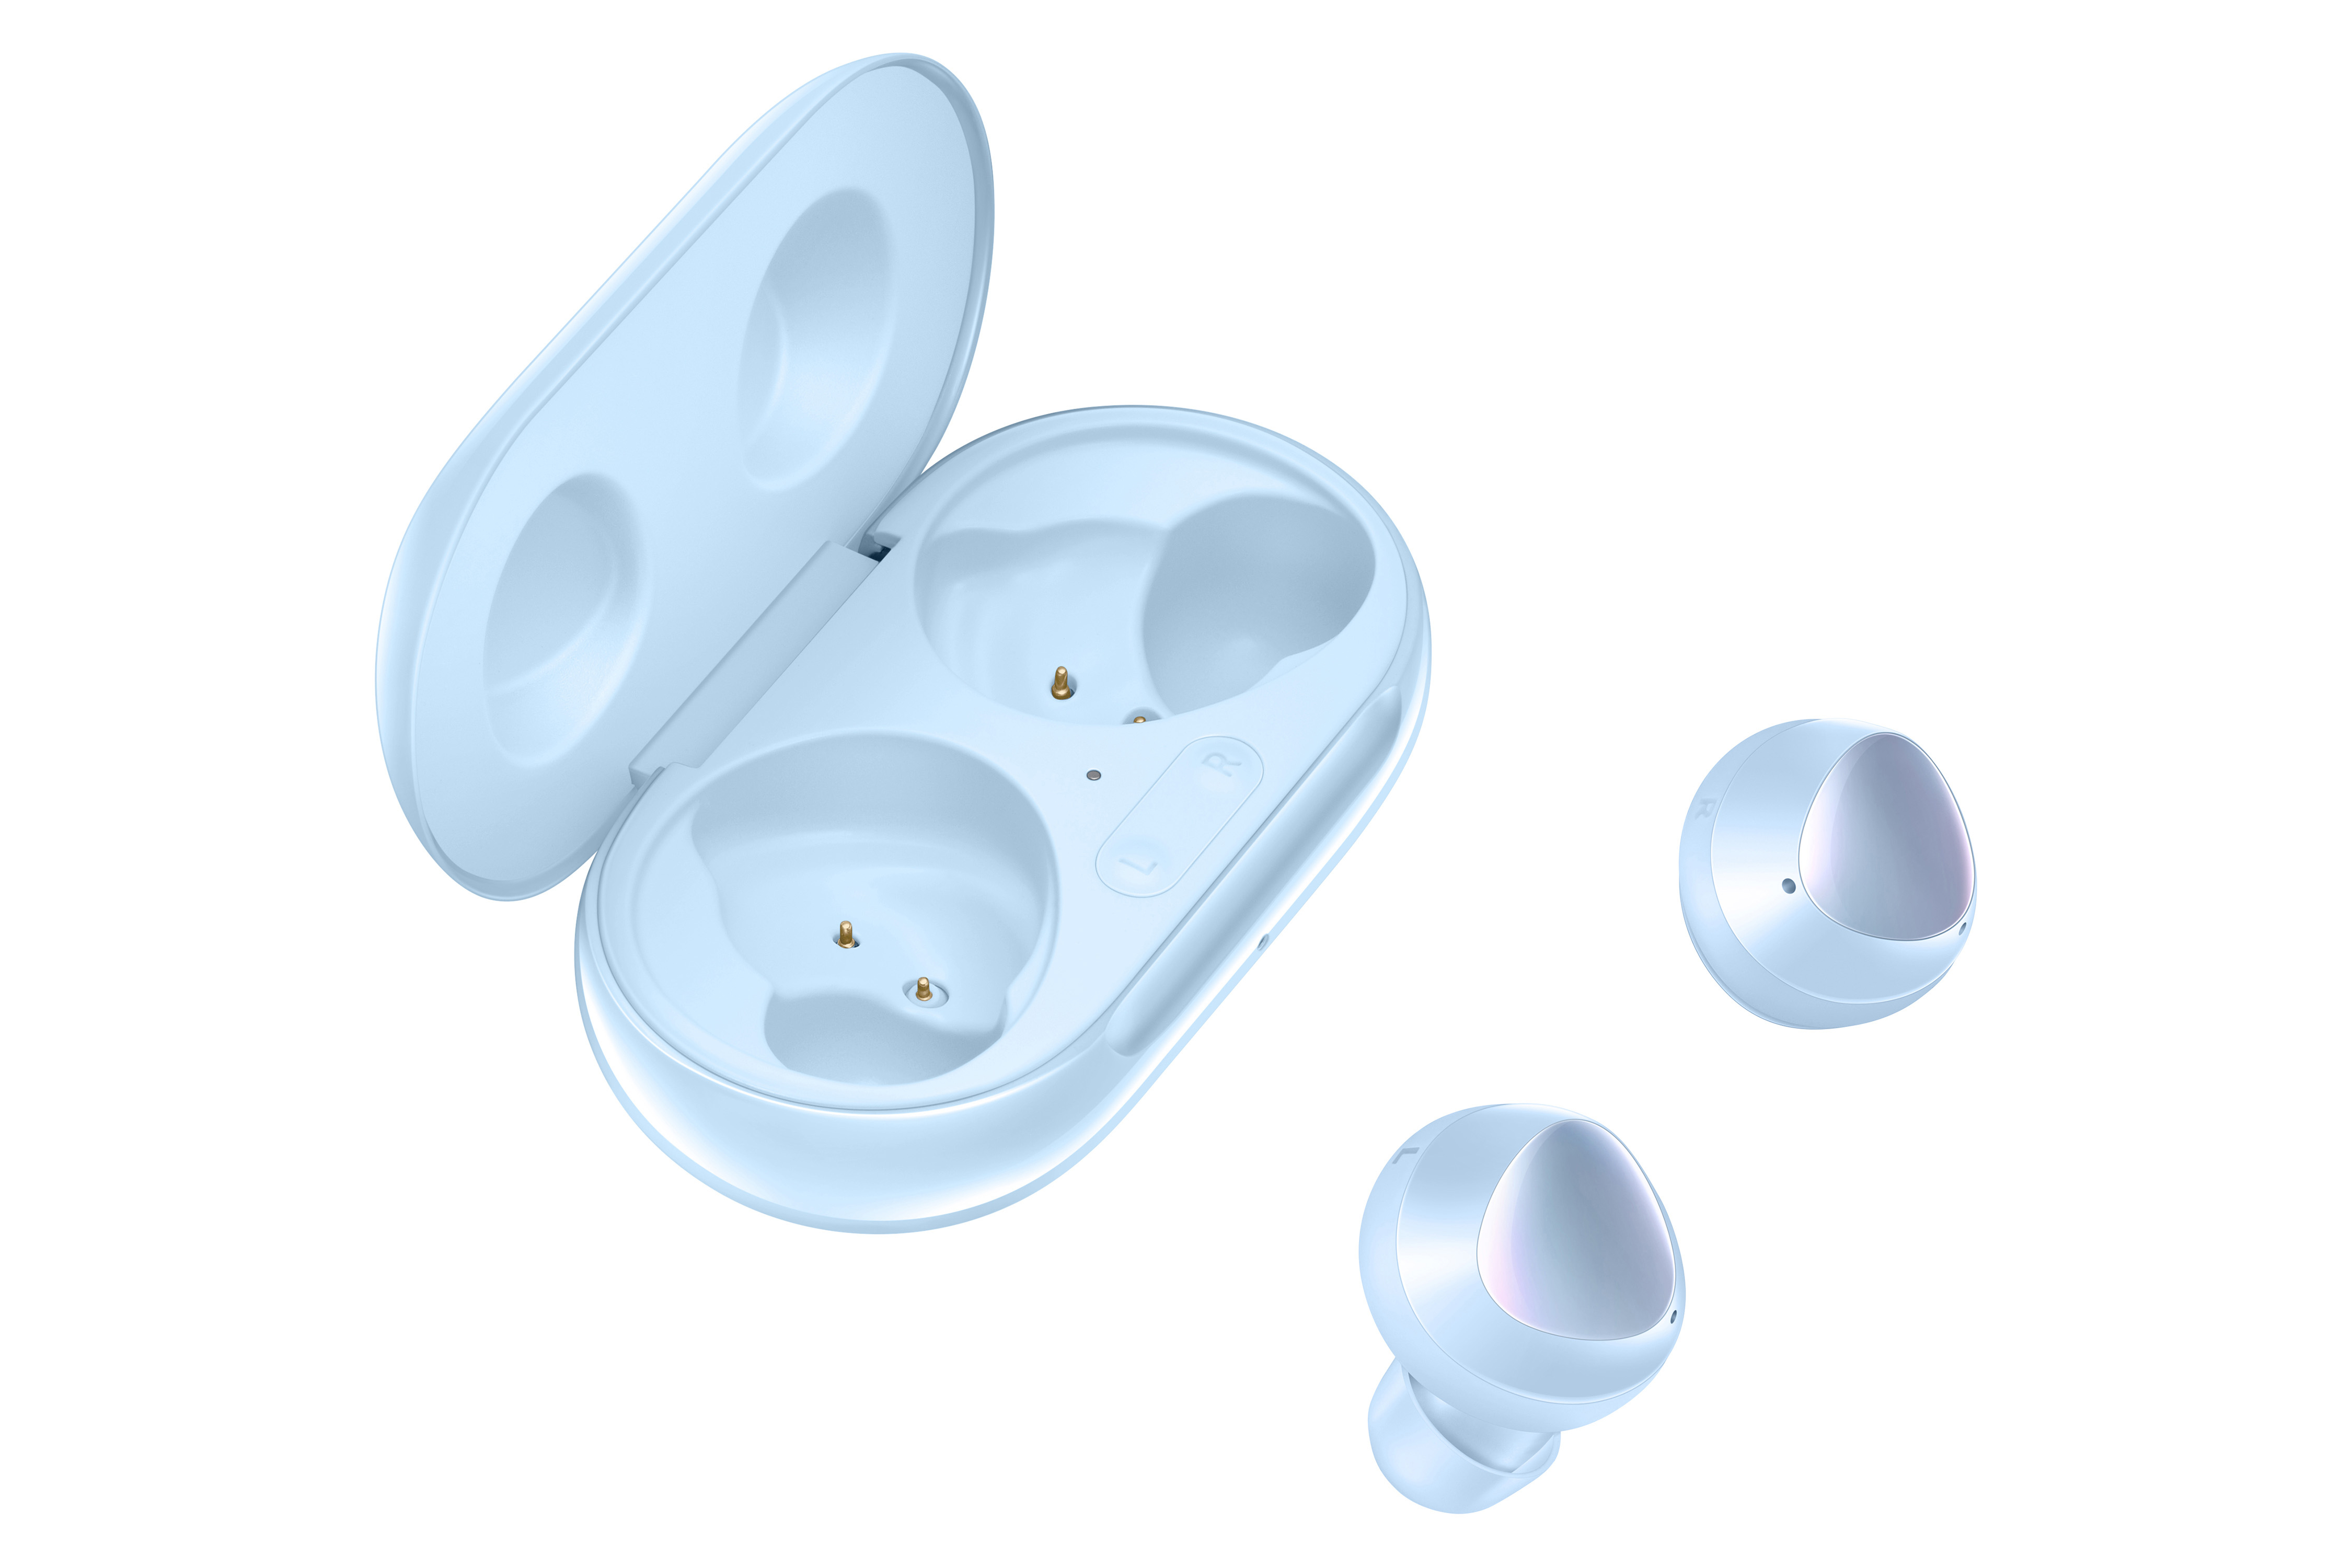 samsung galaxy buds plus 2 product photography  sky blue